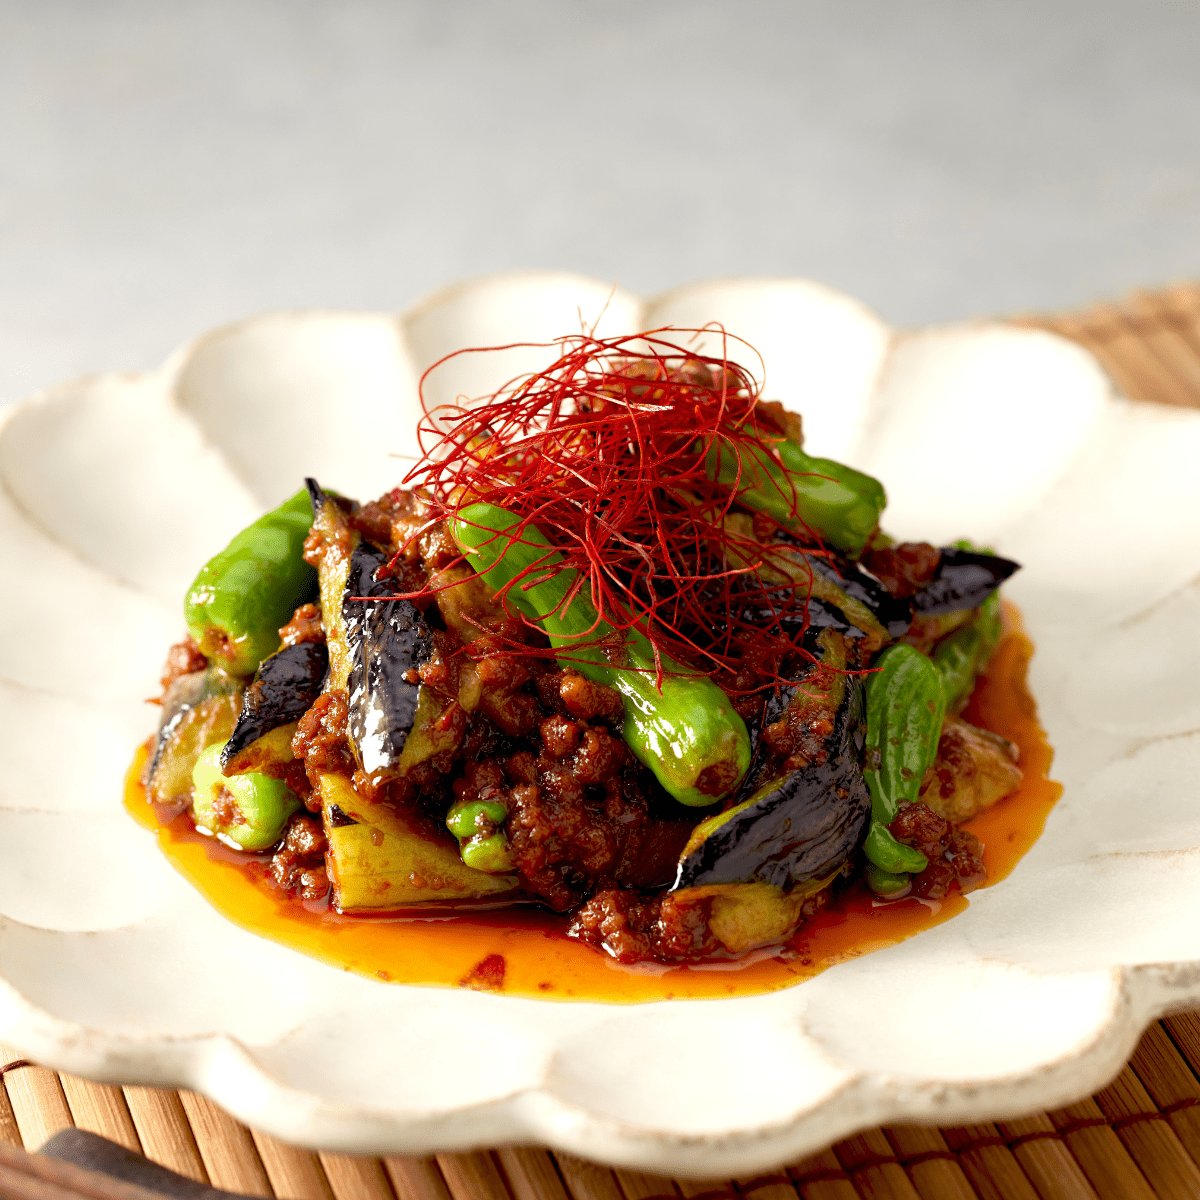 Fried Eggplant with Chinese Chili Sauce DKINT - Tokyo Fresh Direct